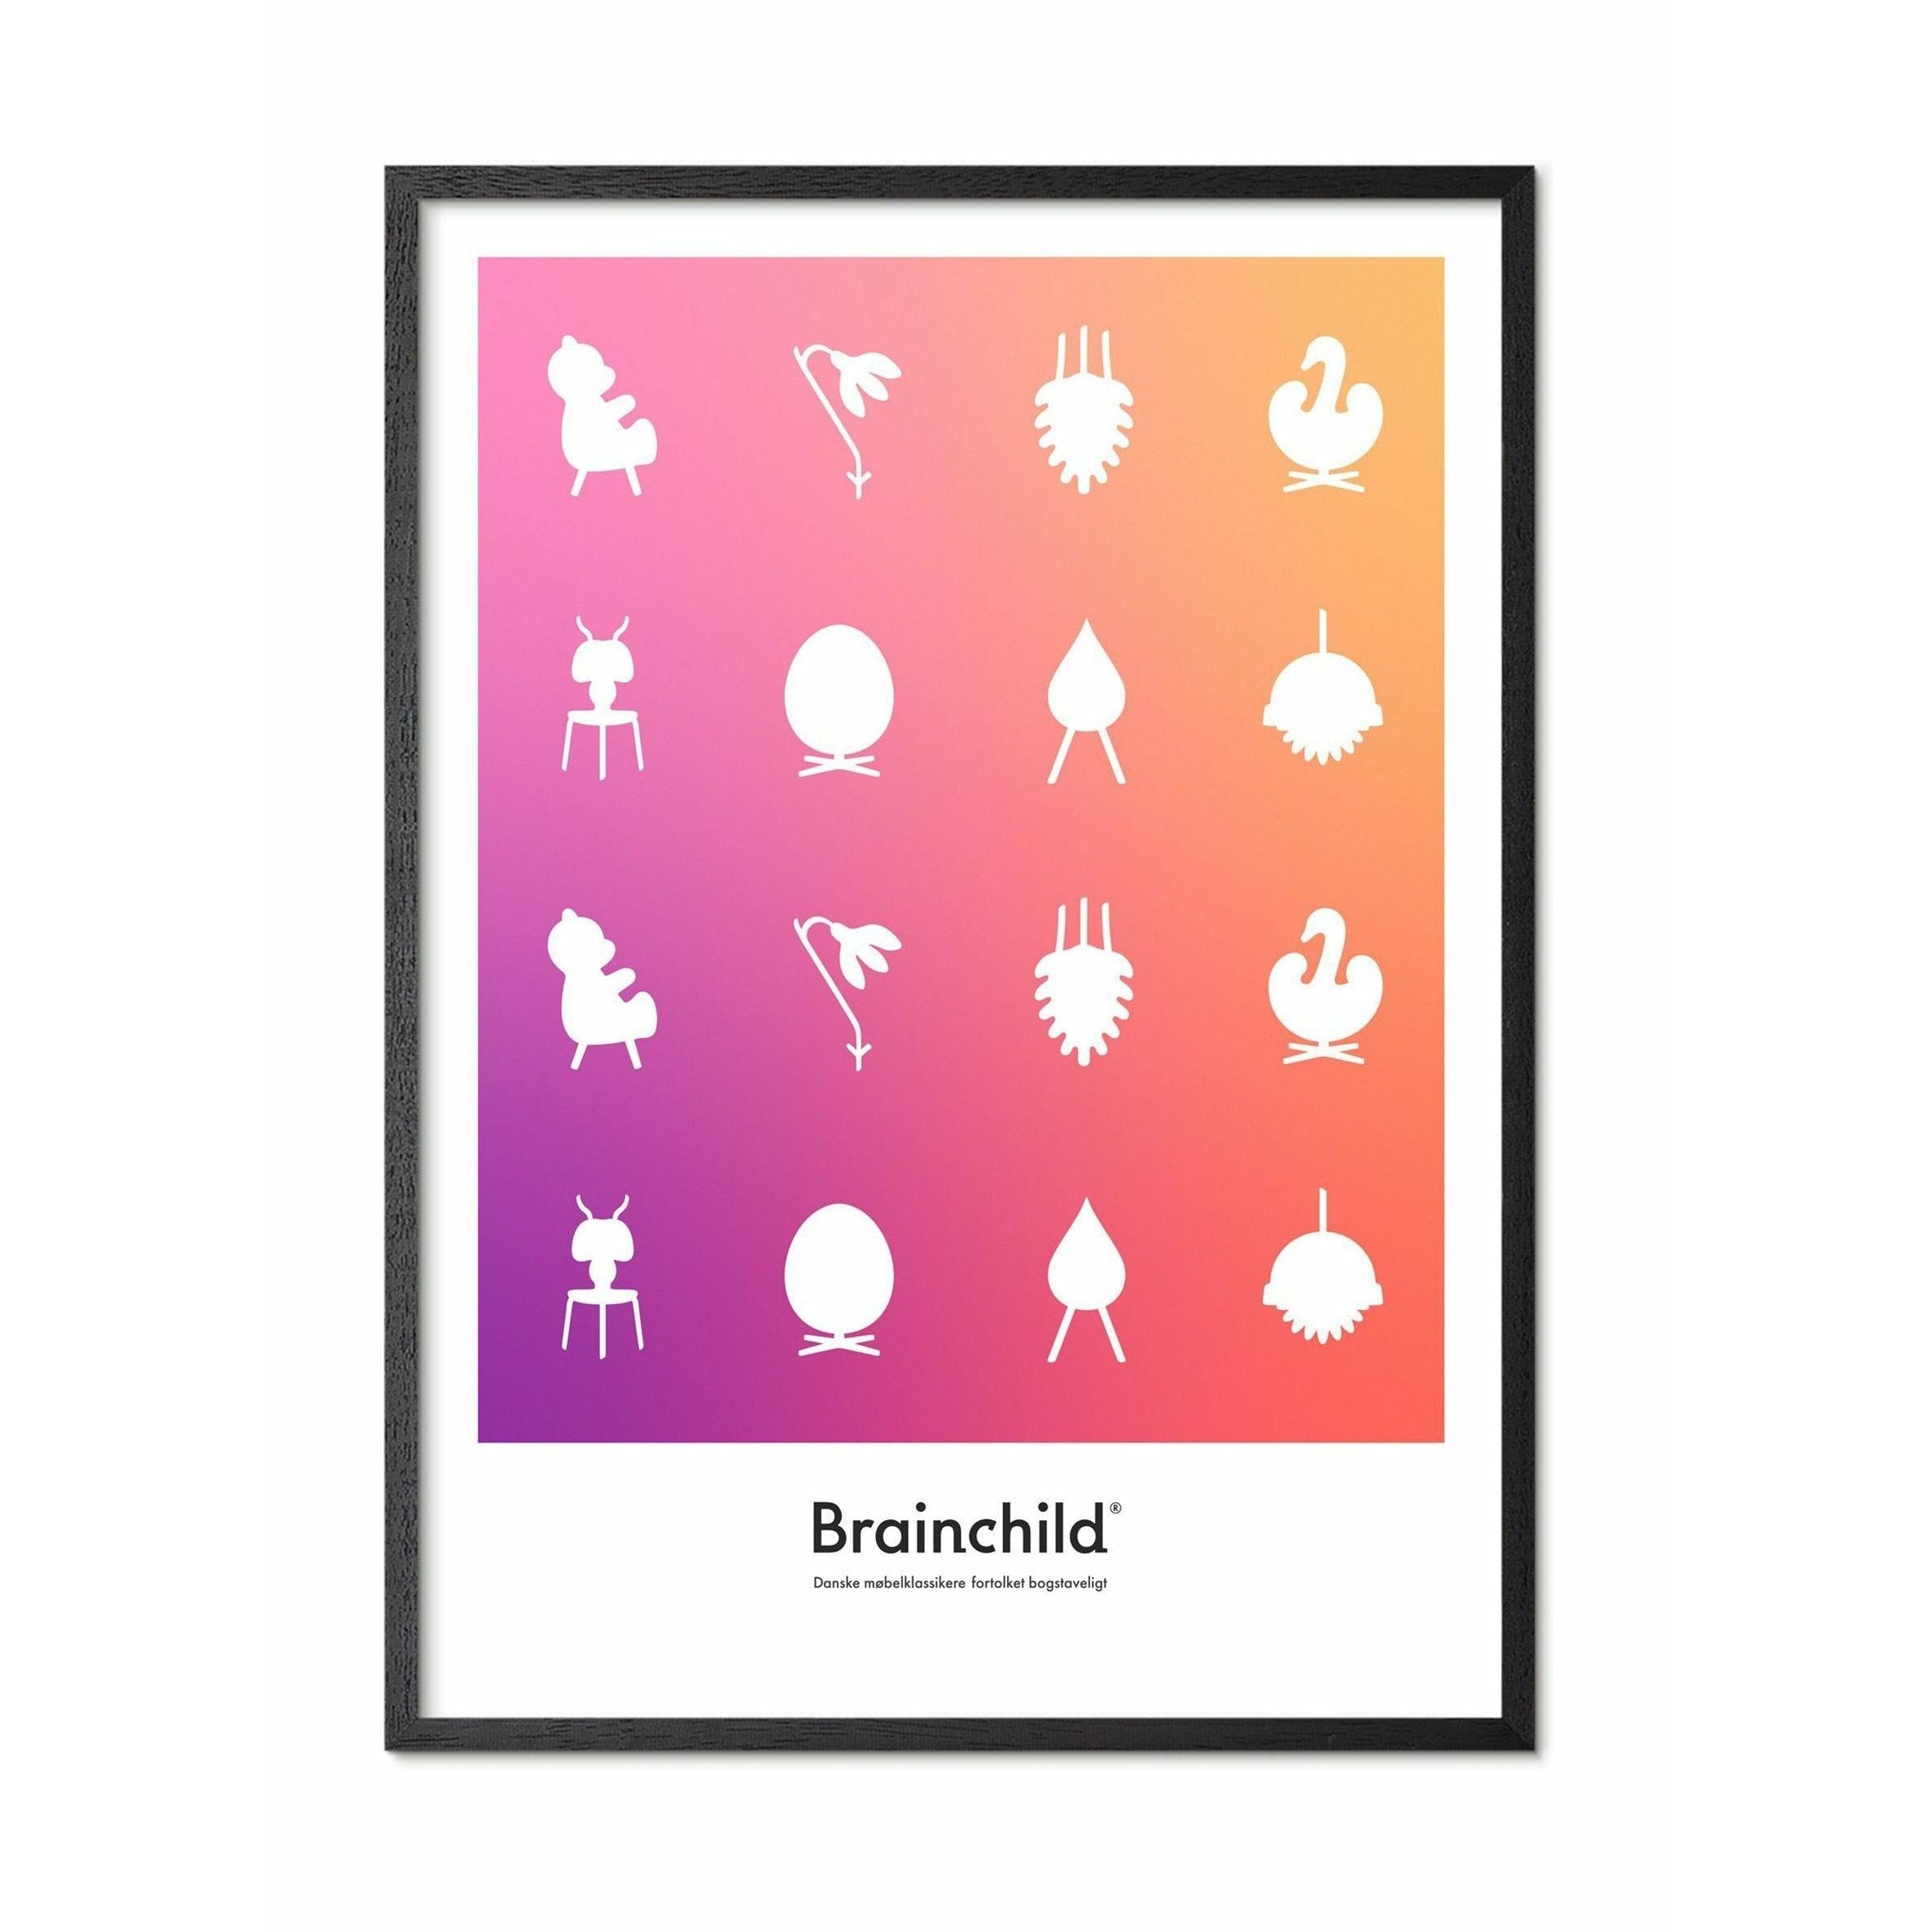 Brainchild Design Icon Poster, Frame In Black Lacquered Wood A5, Colour